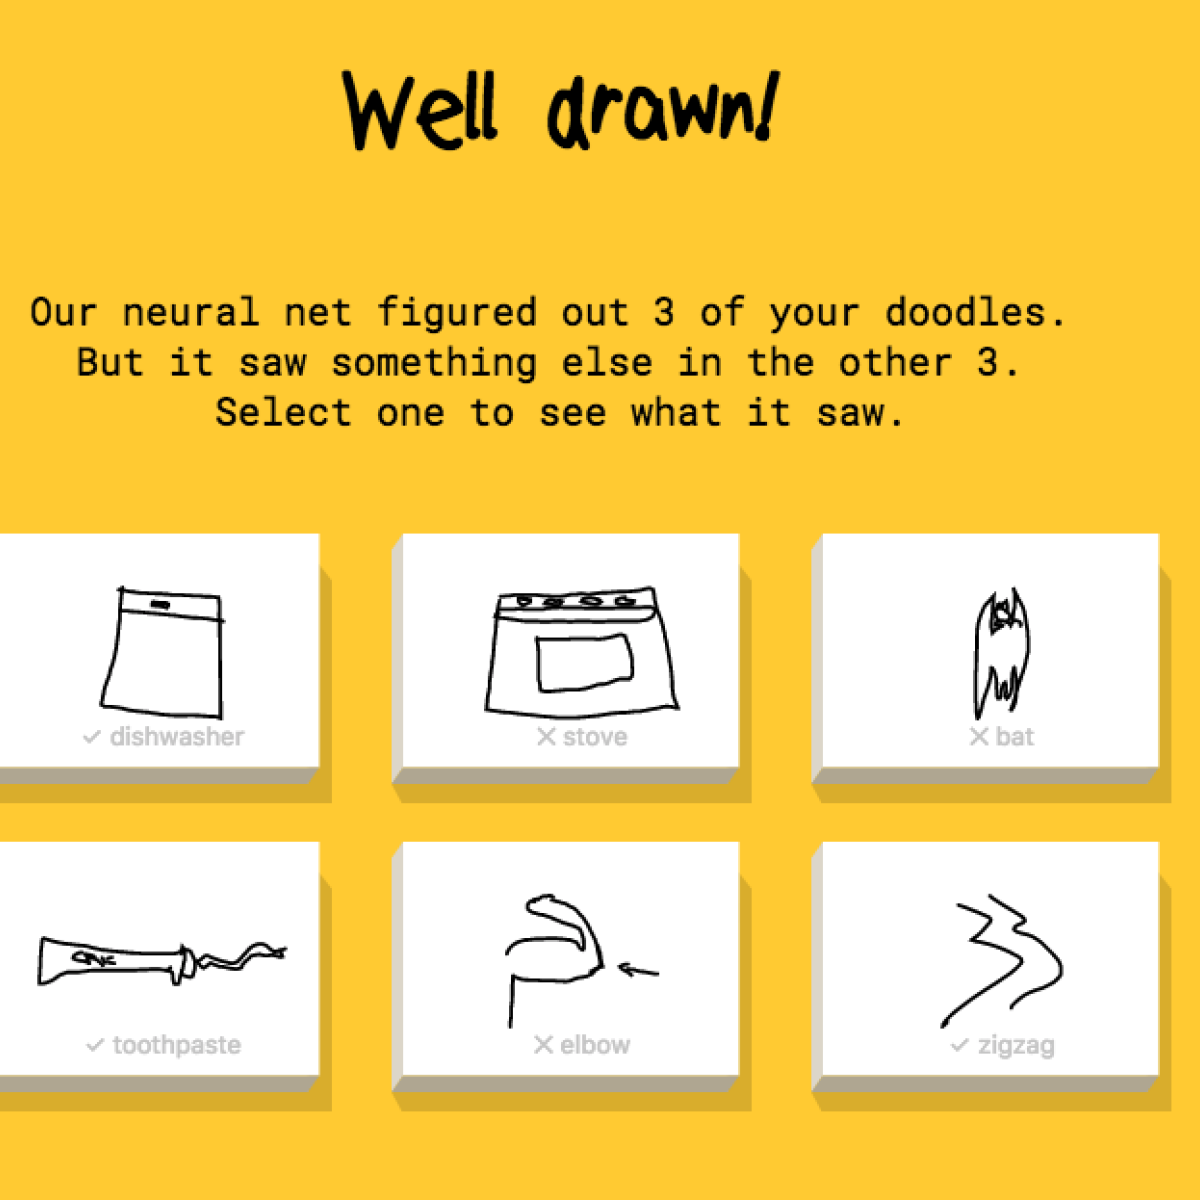 Google launches AutoDraw, an AI-based image recognition tool that